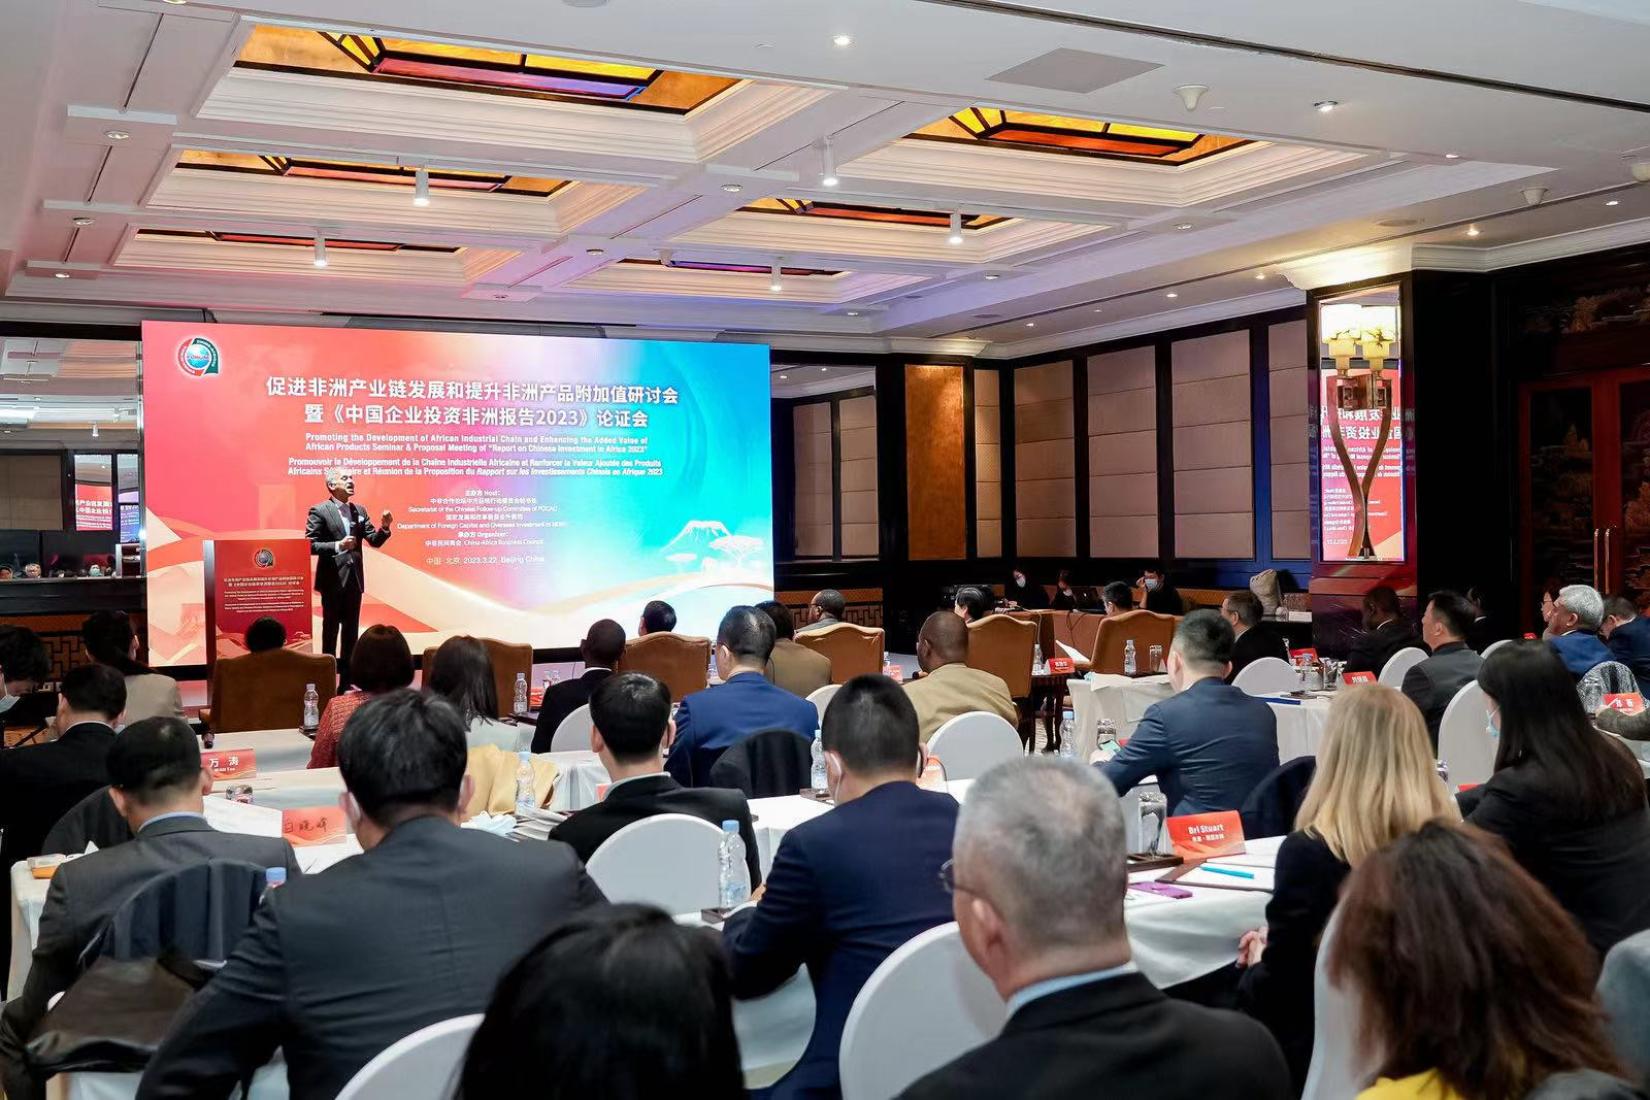 Promoting the Development of African Industrial Chain and Enhancing the Added Value of African Products – Seminar and Proposal Meeting of “Report on Chinese Investment in Africa 2023”